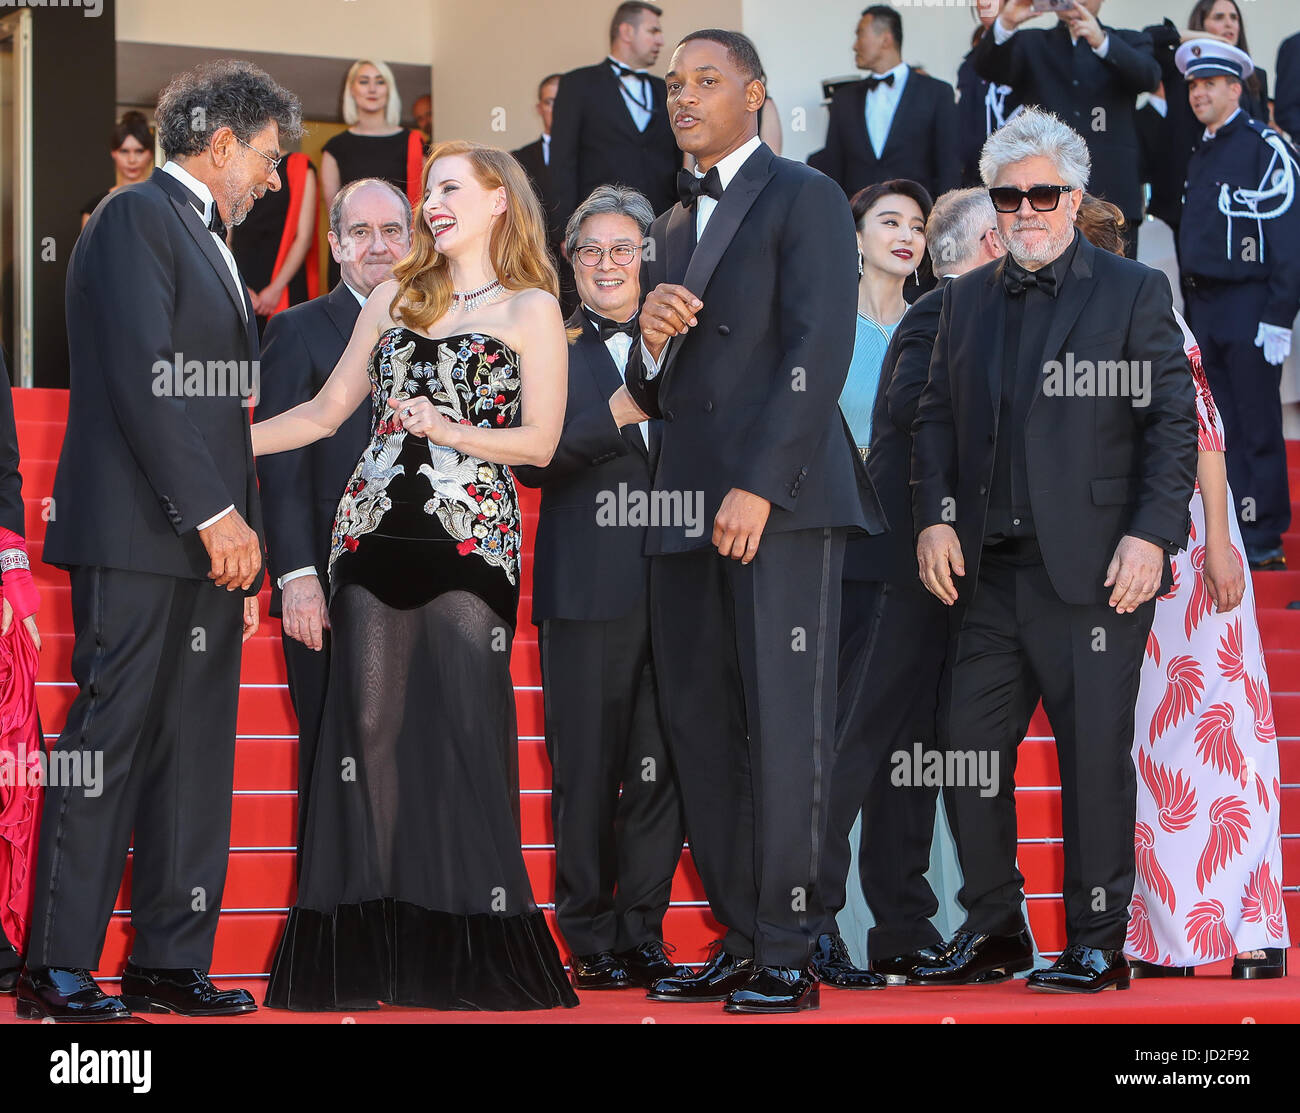 70th Cannes Film Festival - Gala Opening - 'Ismael's Ghosts' red carpet  Featuring: Gabriel Yared, Jessica Chastain, Will Smith, Pedro Almodovar Where: Cannes, France When: 17 May 2017 Credit: WENN.com Stock Photo